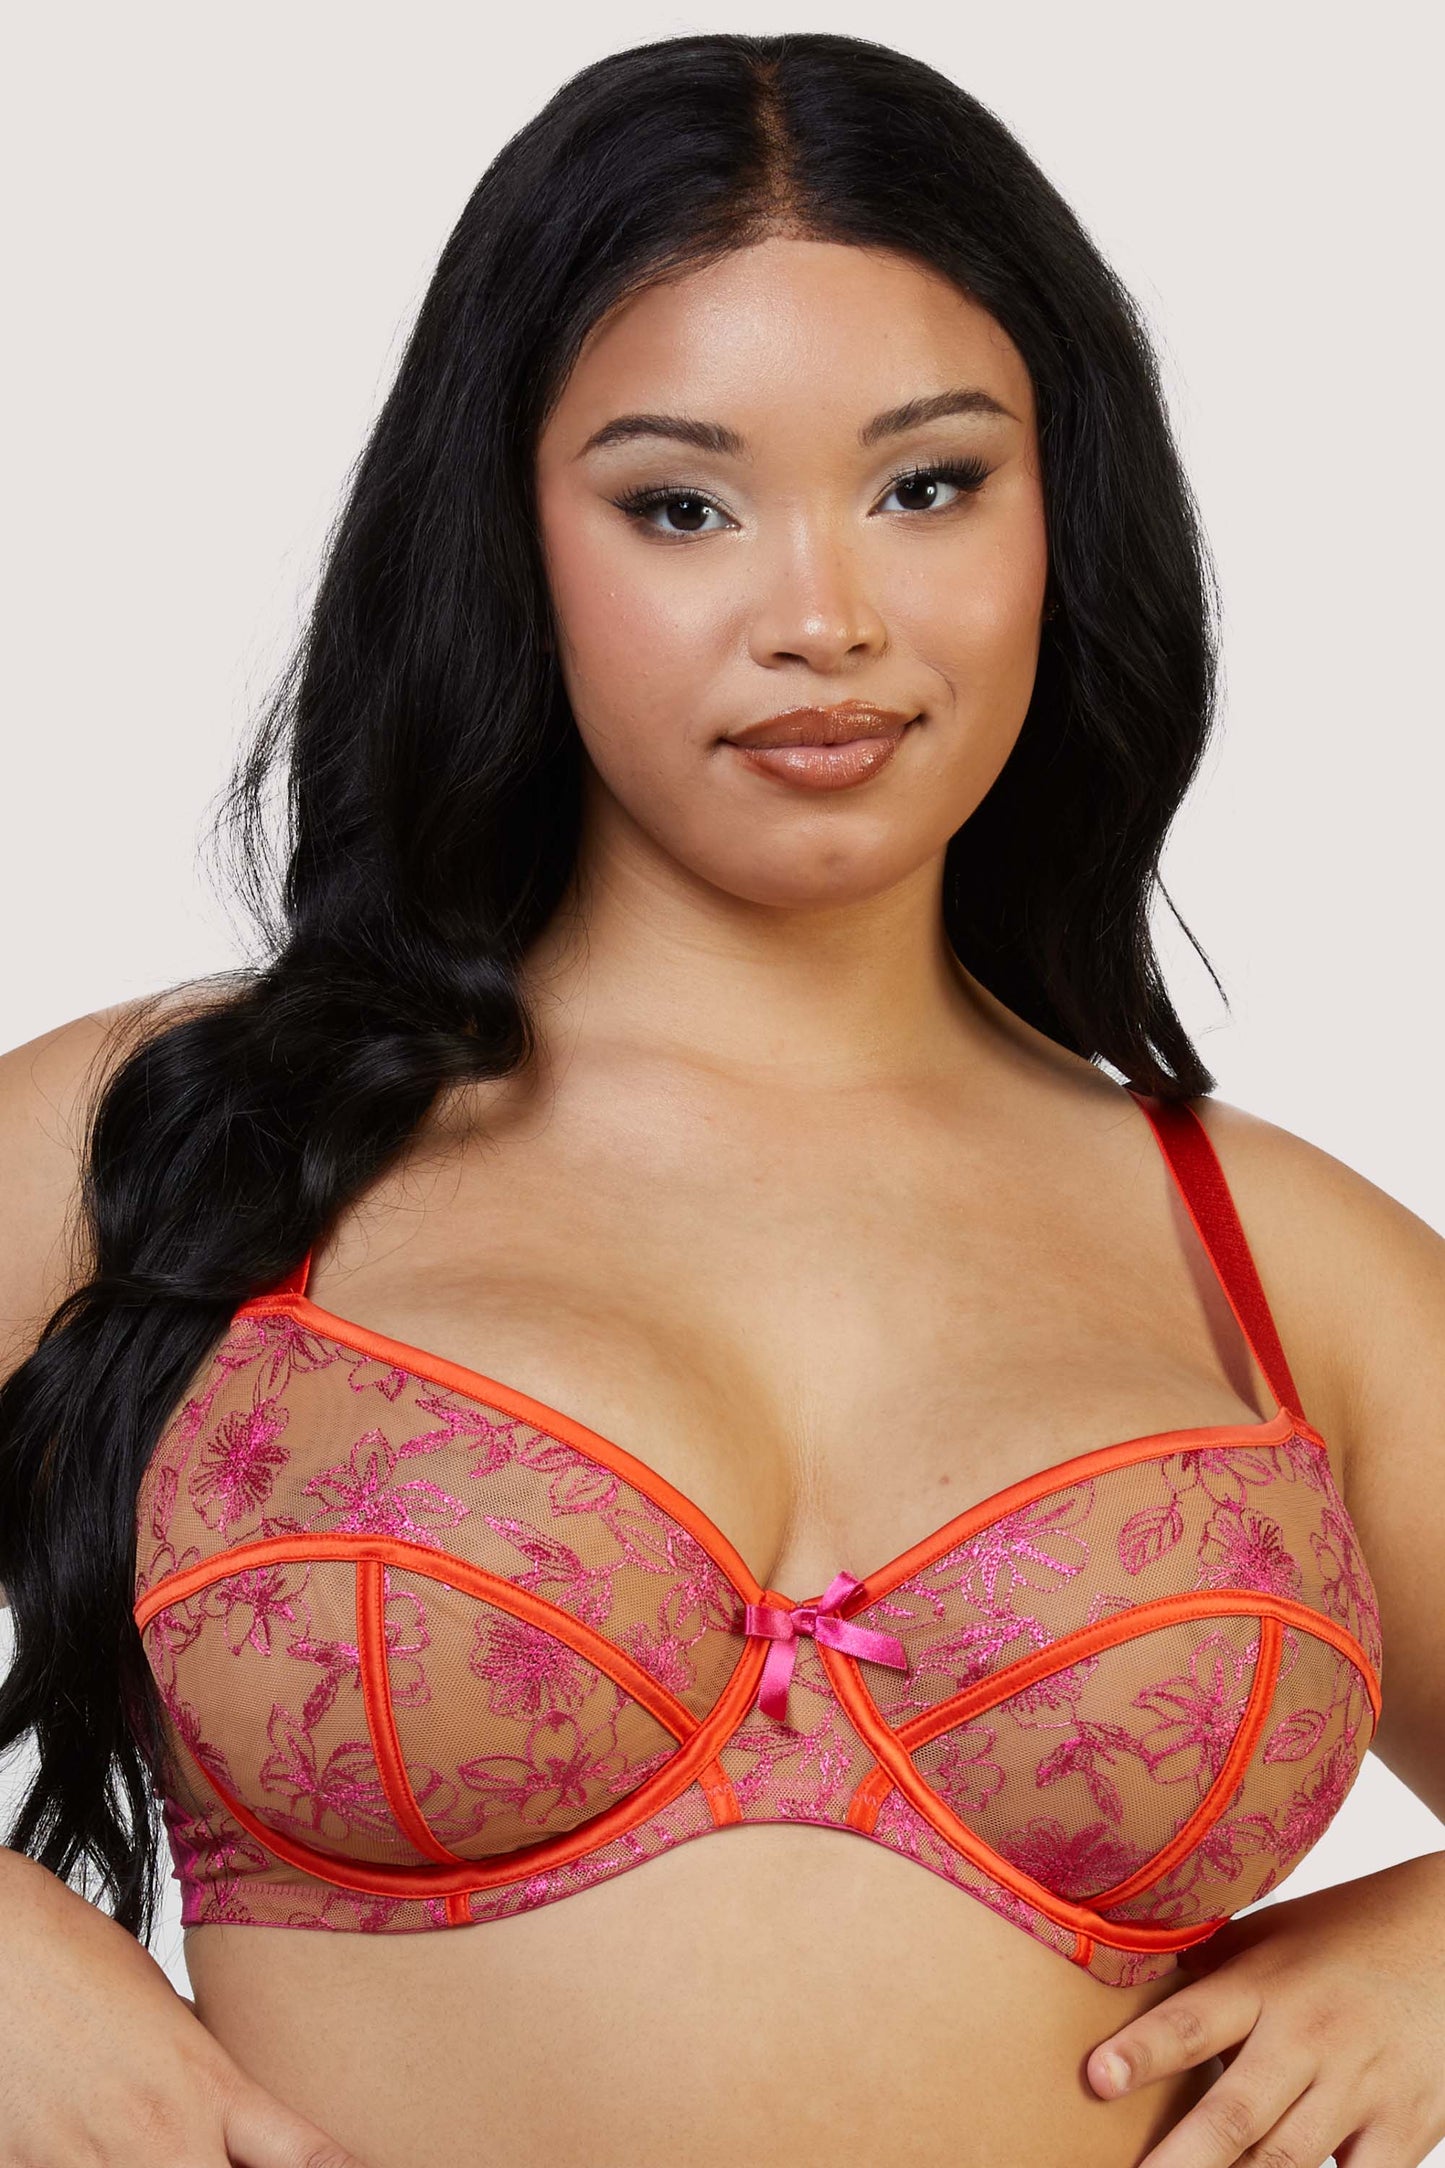 Plus Size Transparent Balconette With Embroidery And See Through Lace Red,  Pink, White, And Black Half Cup Black Lace Bra Top For Womens Sexy Lingerie  230517 From Long005, $13.32